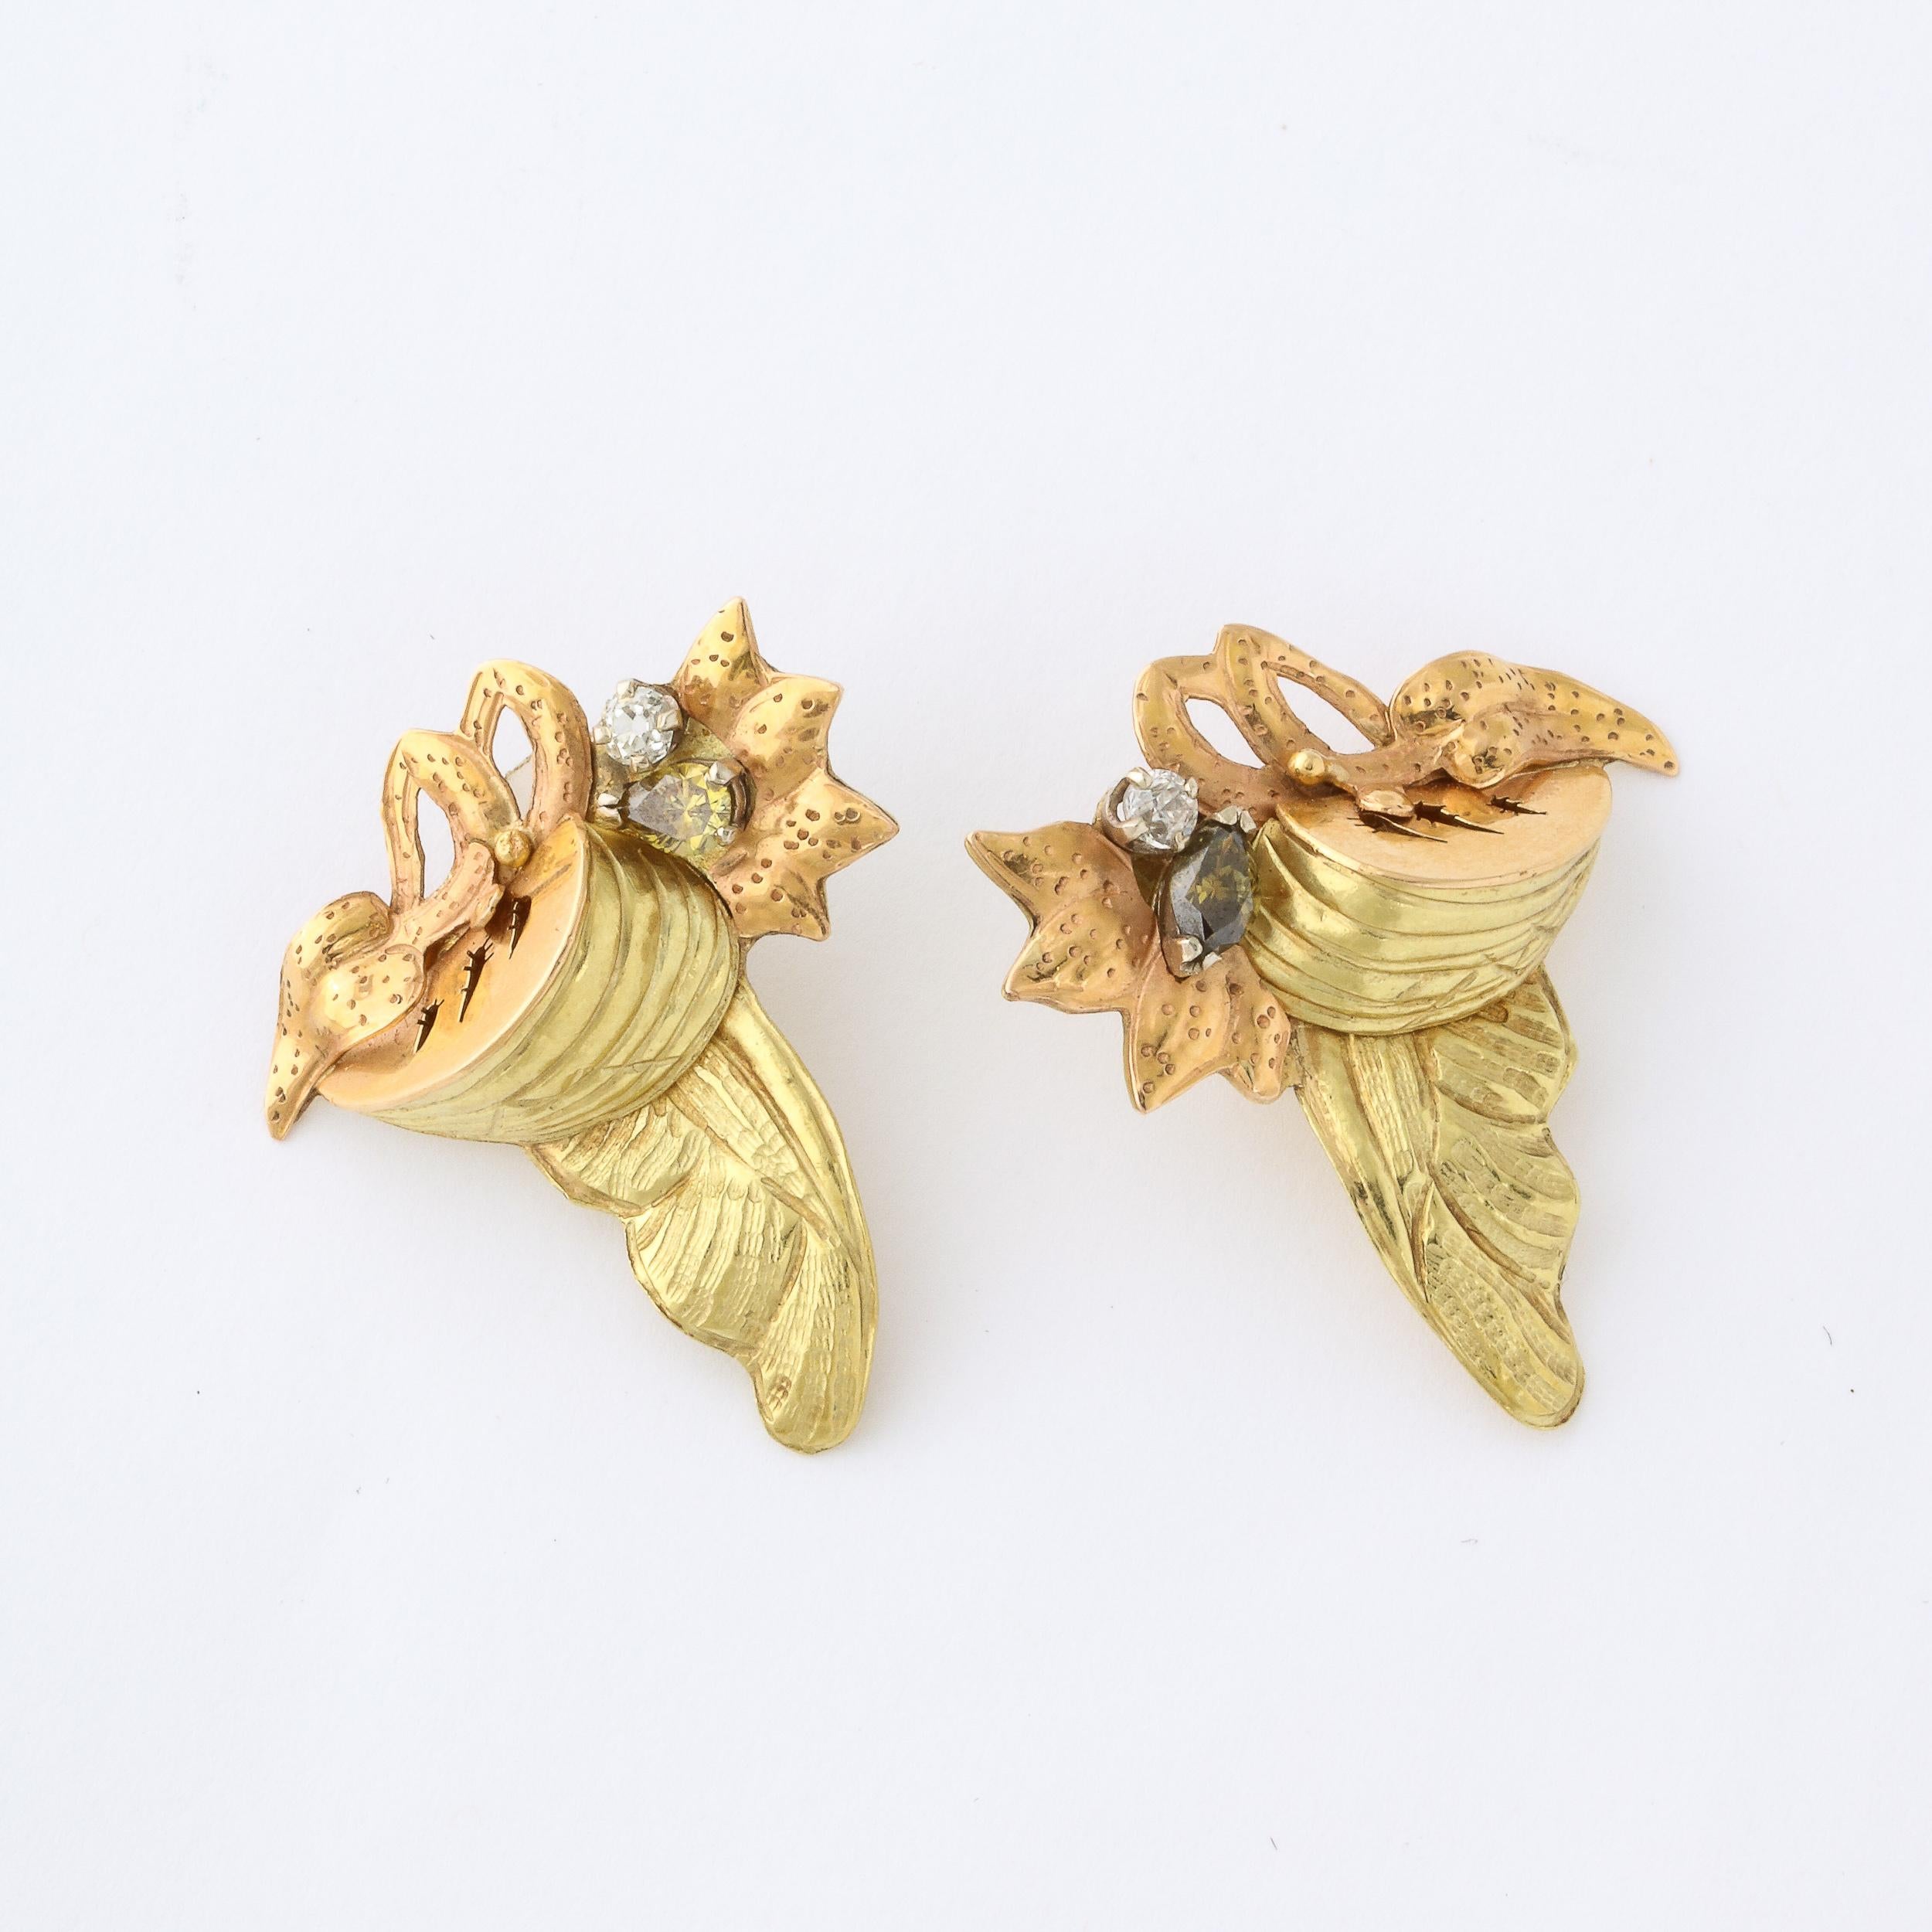 'These retro style pierced earrings were custom made by Barnaby circa 1980. They are made of 18k rose and yellow gold in a stylized floral and geometric design. Each earring is set with a round brilliant cut diamonds and each earring is also set